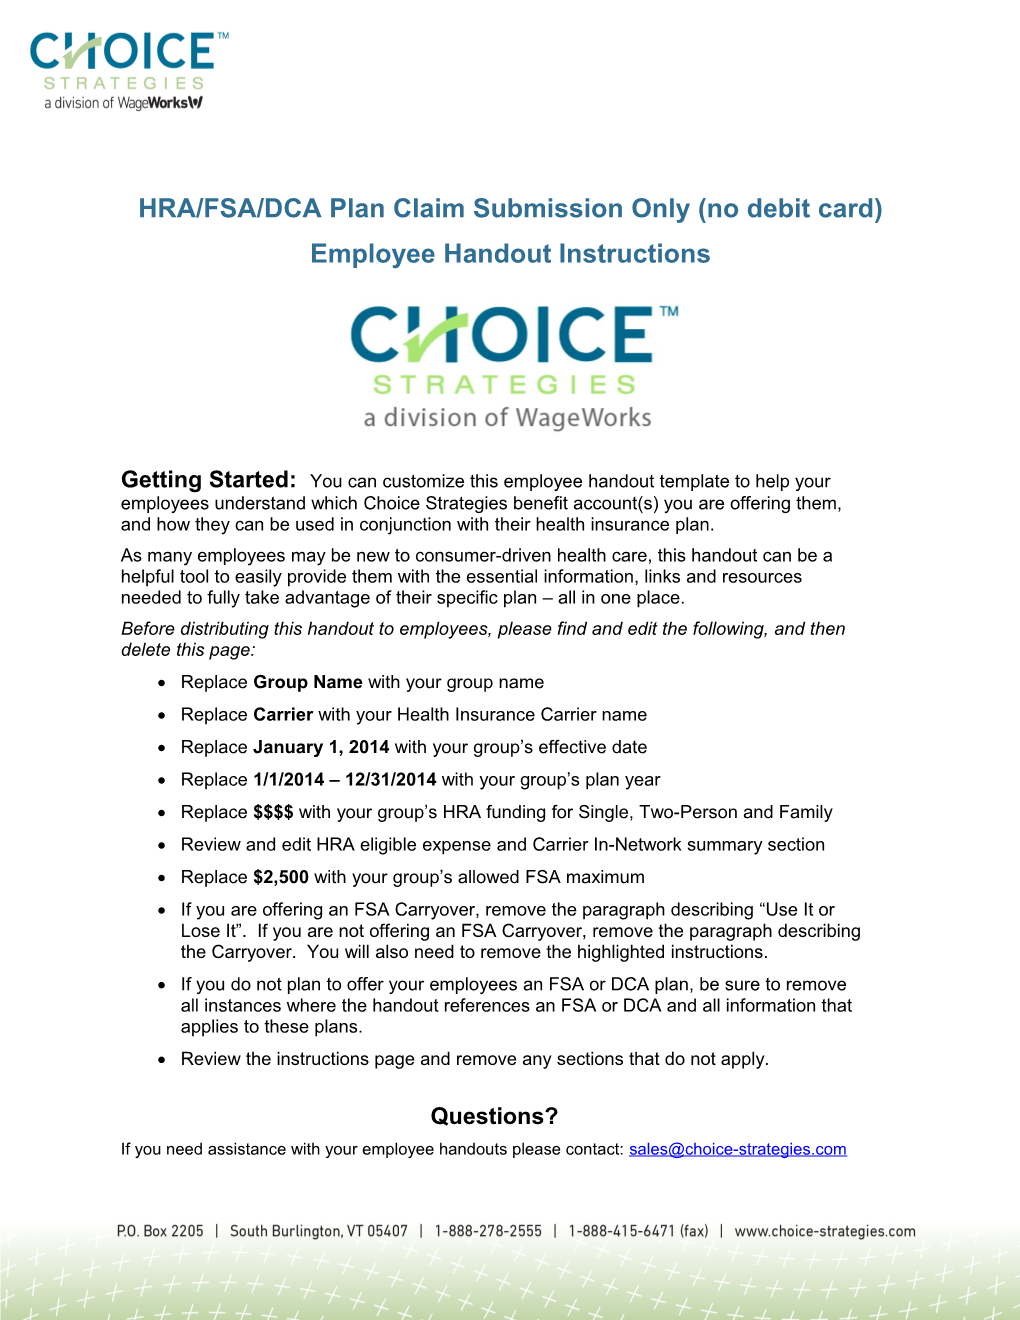 HRA/FSA/DCA Plan Claim Submission Only (No Debit Card)